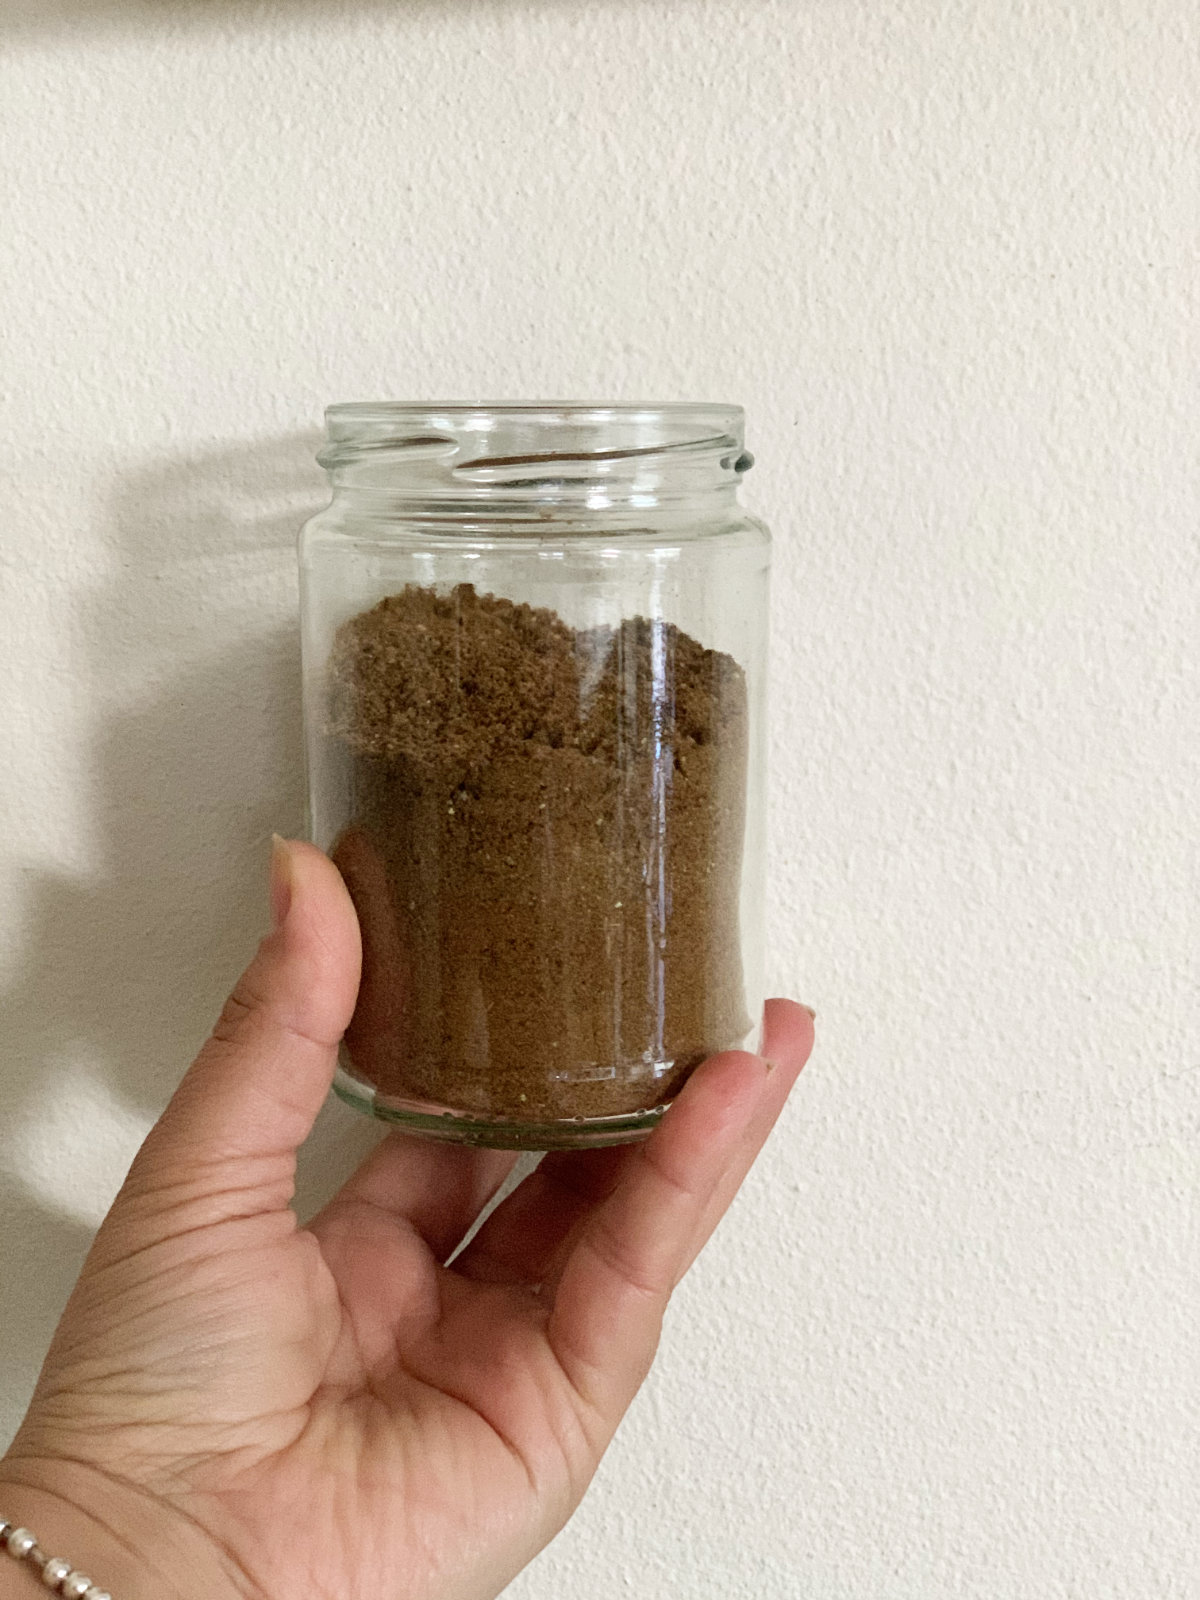 baharat in a recycled jar held by a female hand